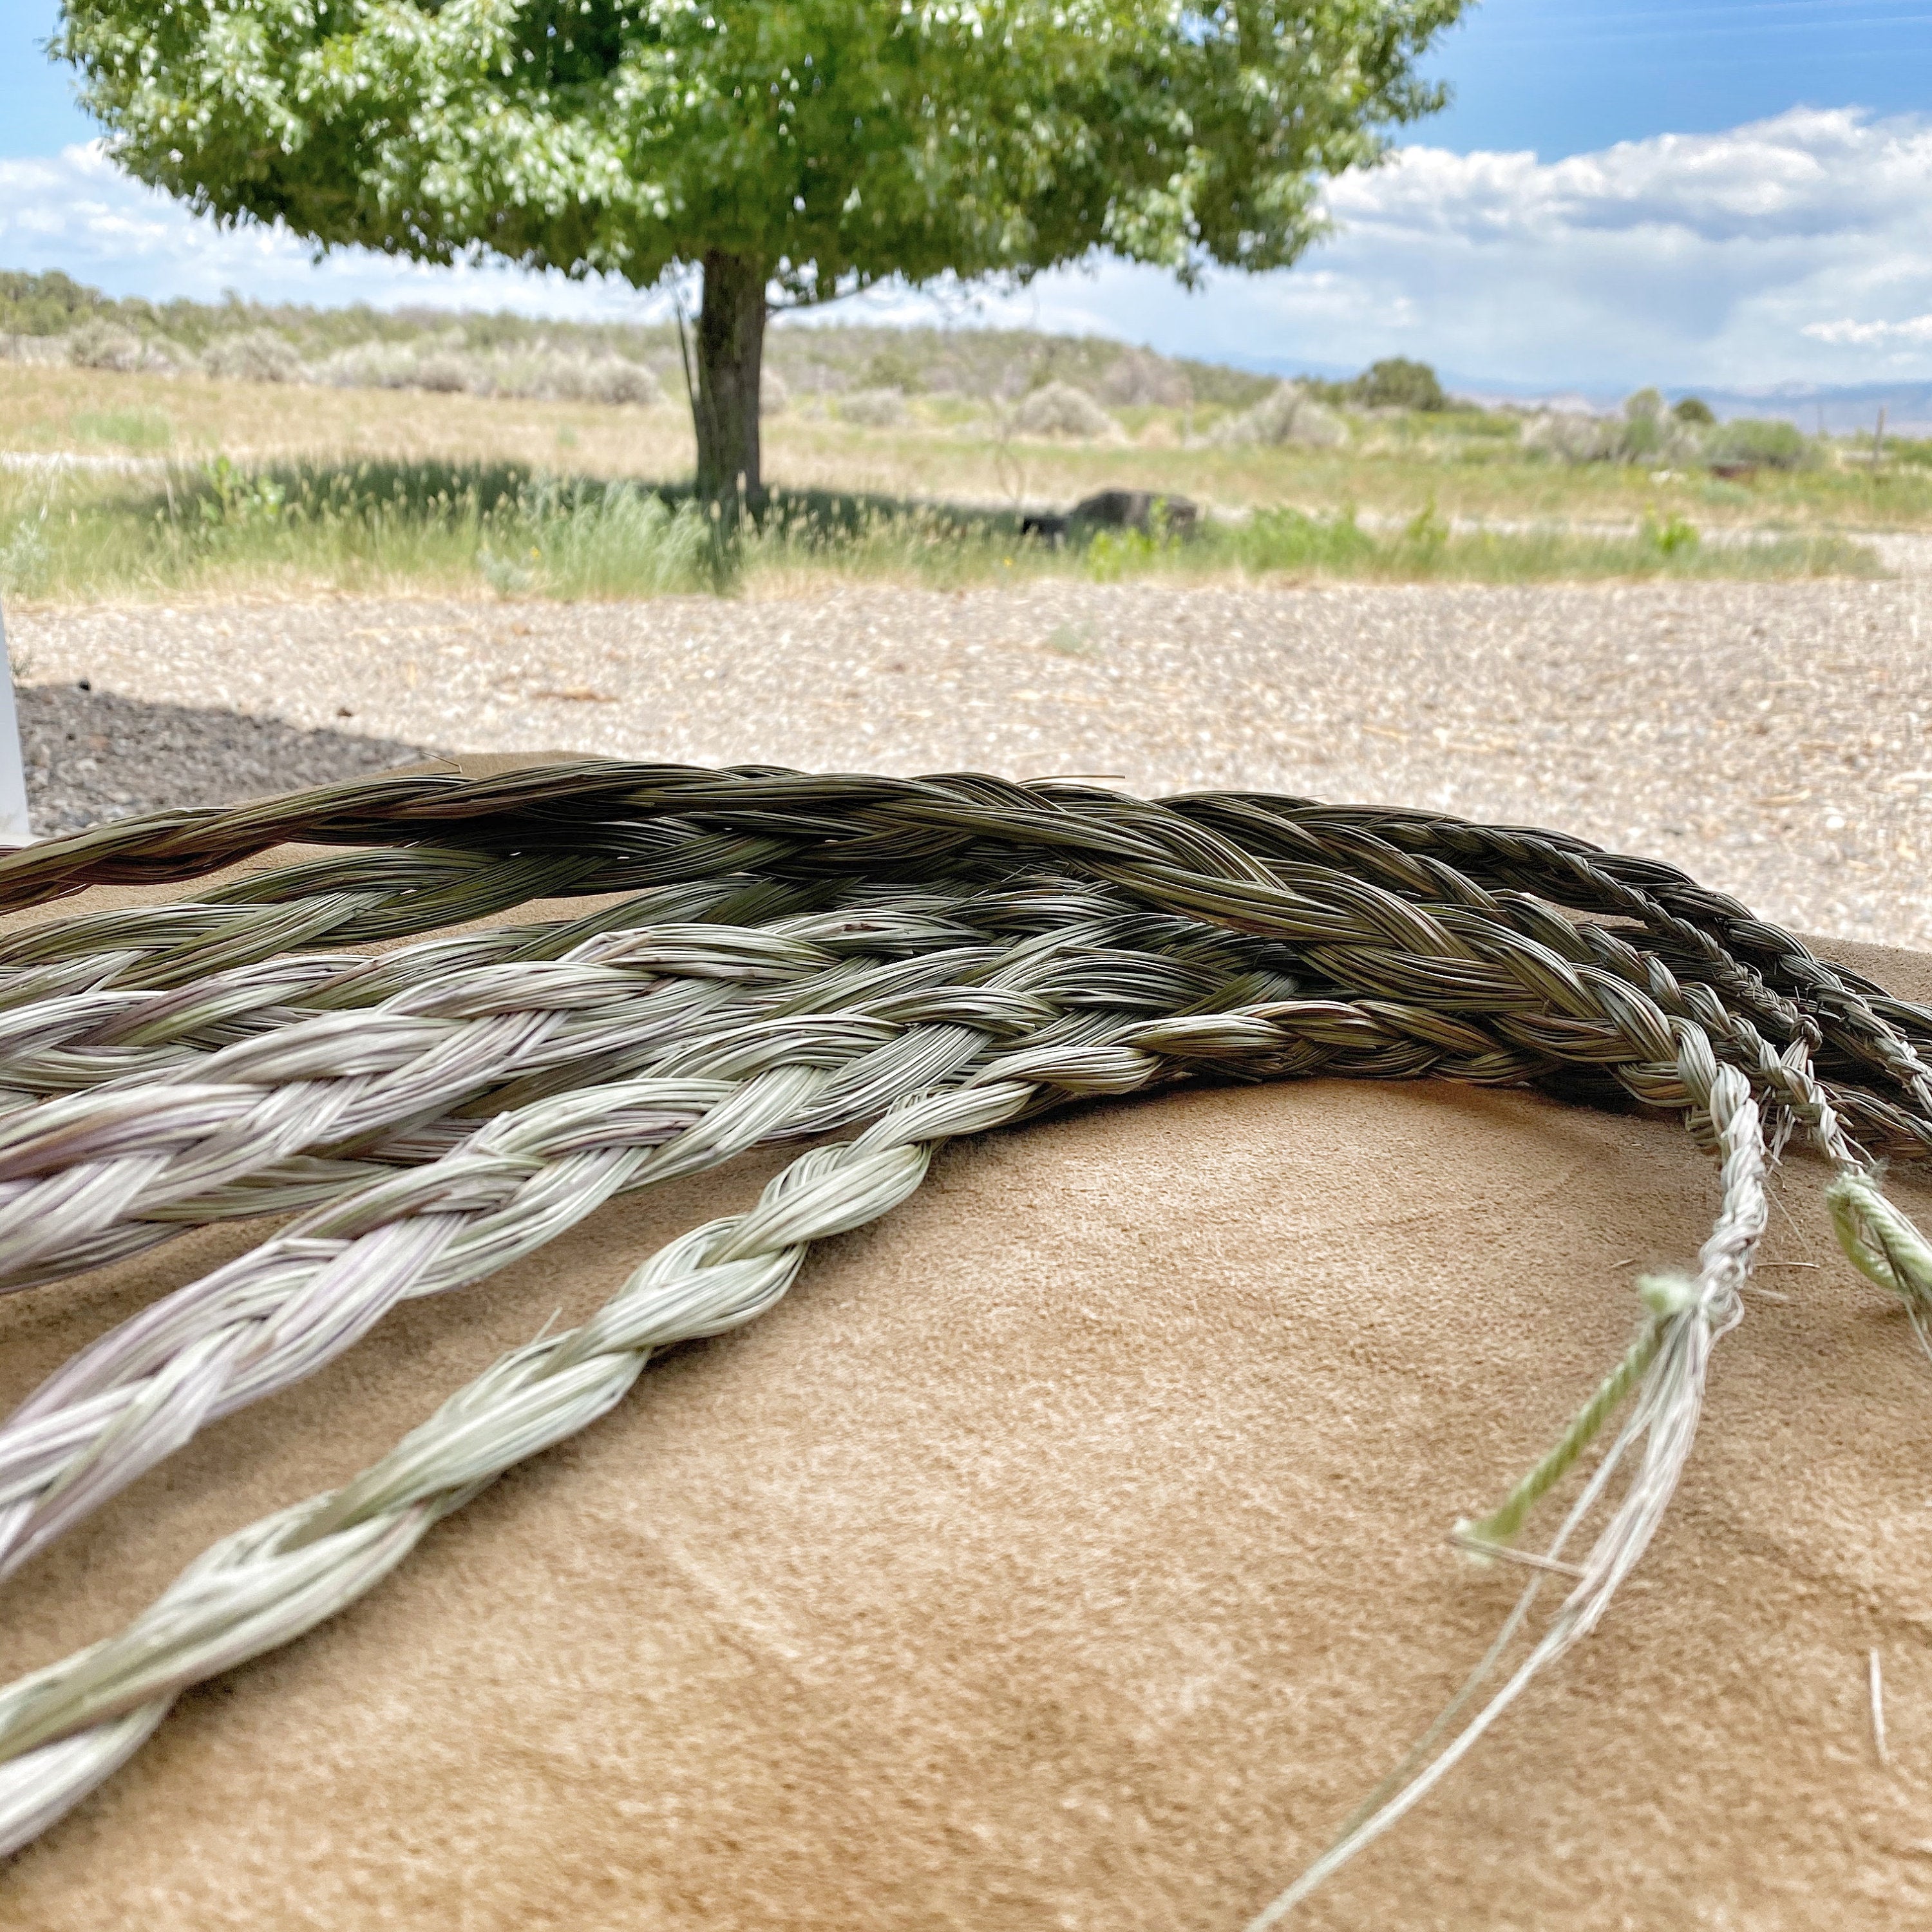 A collection of stunning Sweetgrass braids, harvested and woven with care at Sacred Plant Co Farm.